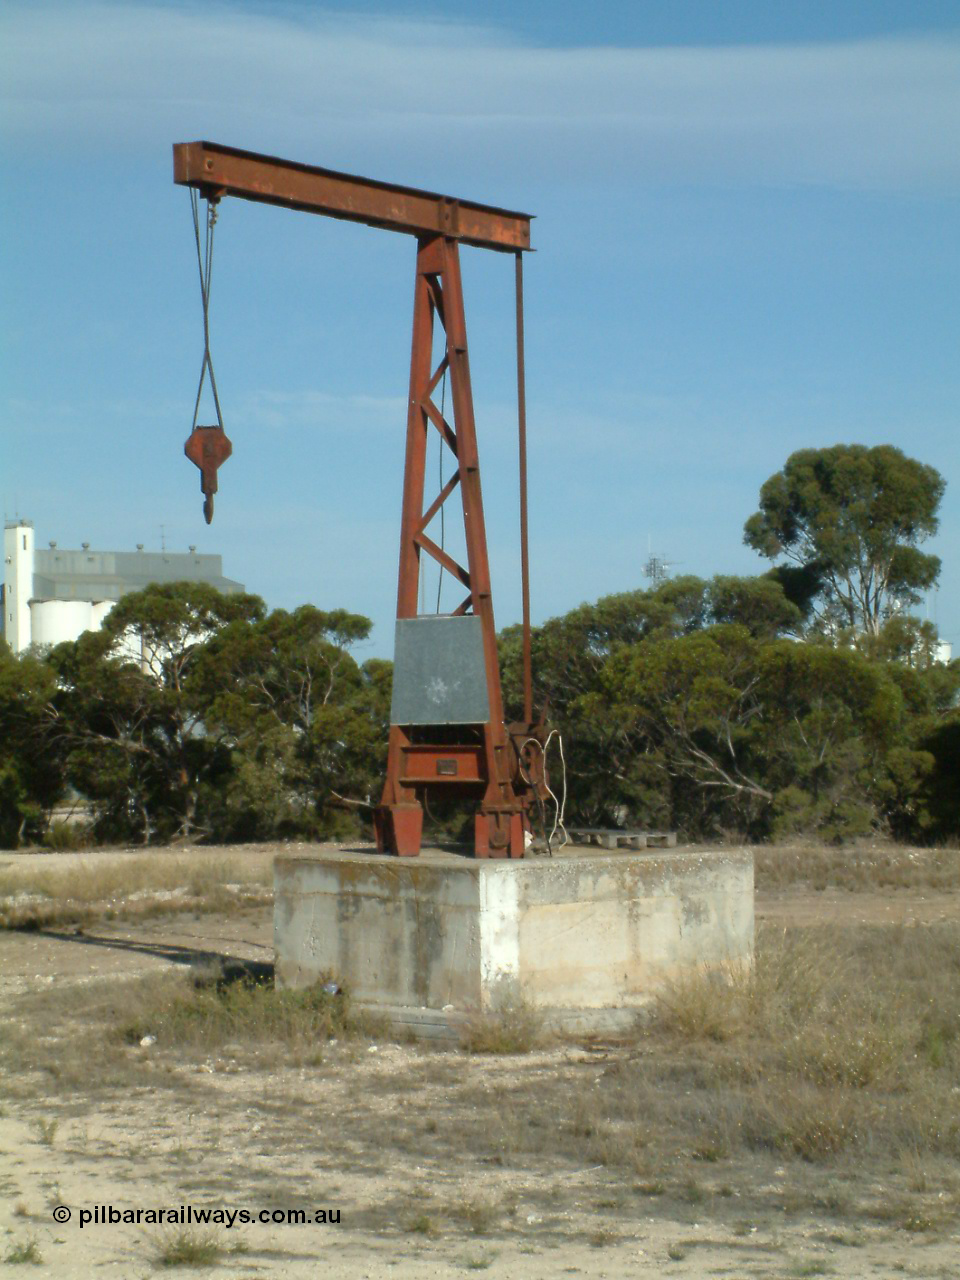 030405 161656
Lock, former yard crane, hand operated 5 ton revolving jib crane and plinth, now located off North Terrace, 5th April 2003.
